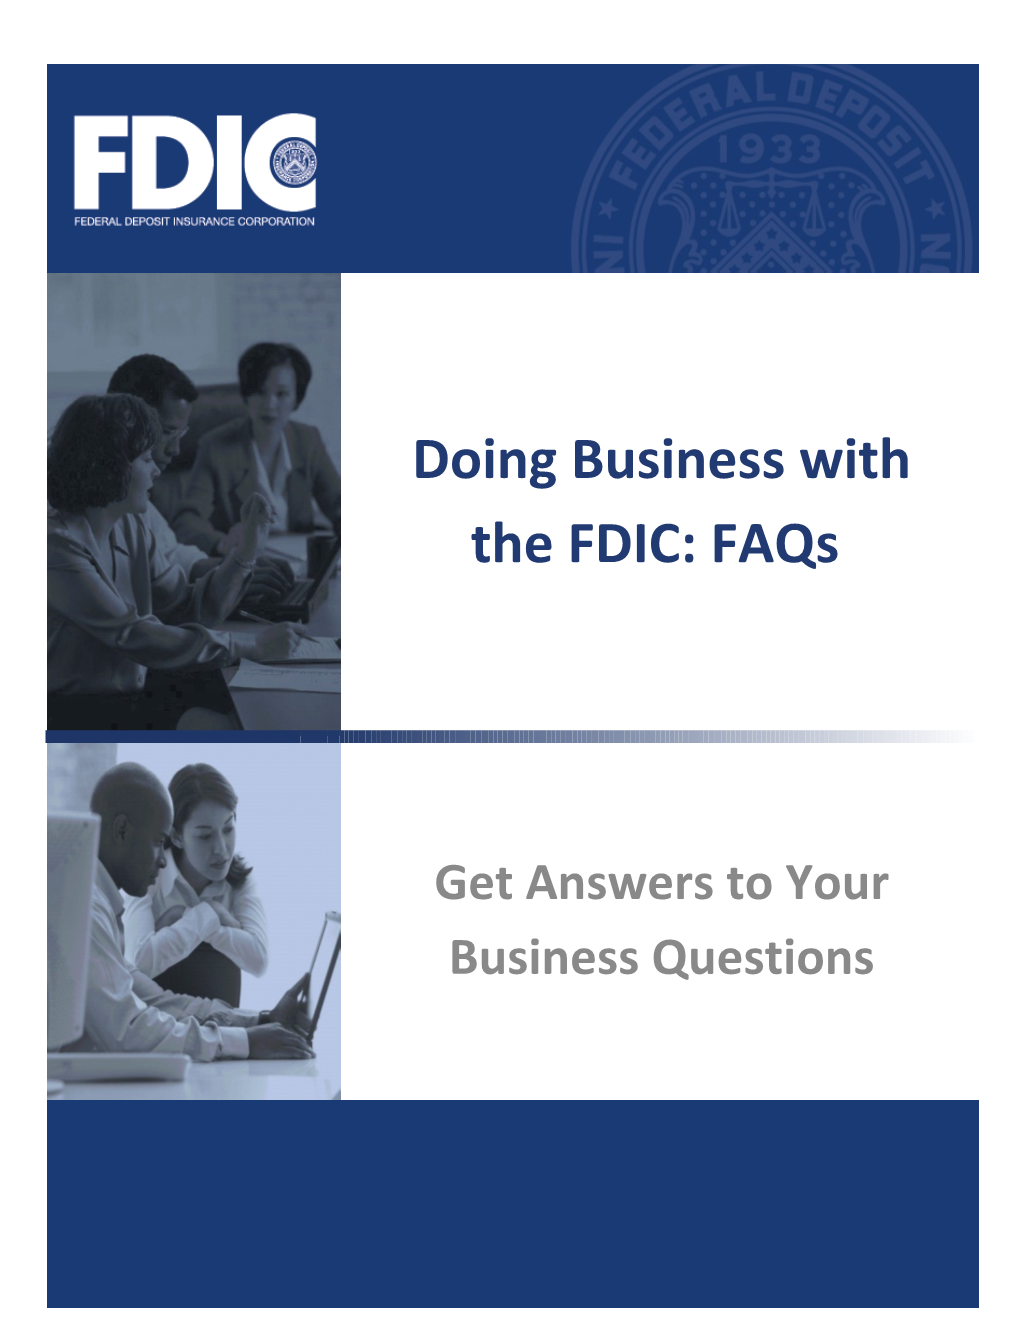 6-4 FAQ's About Doing Business with the FDIC